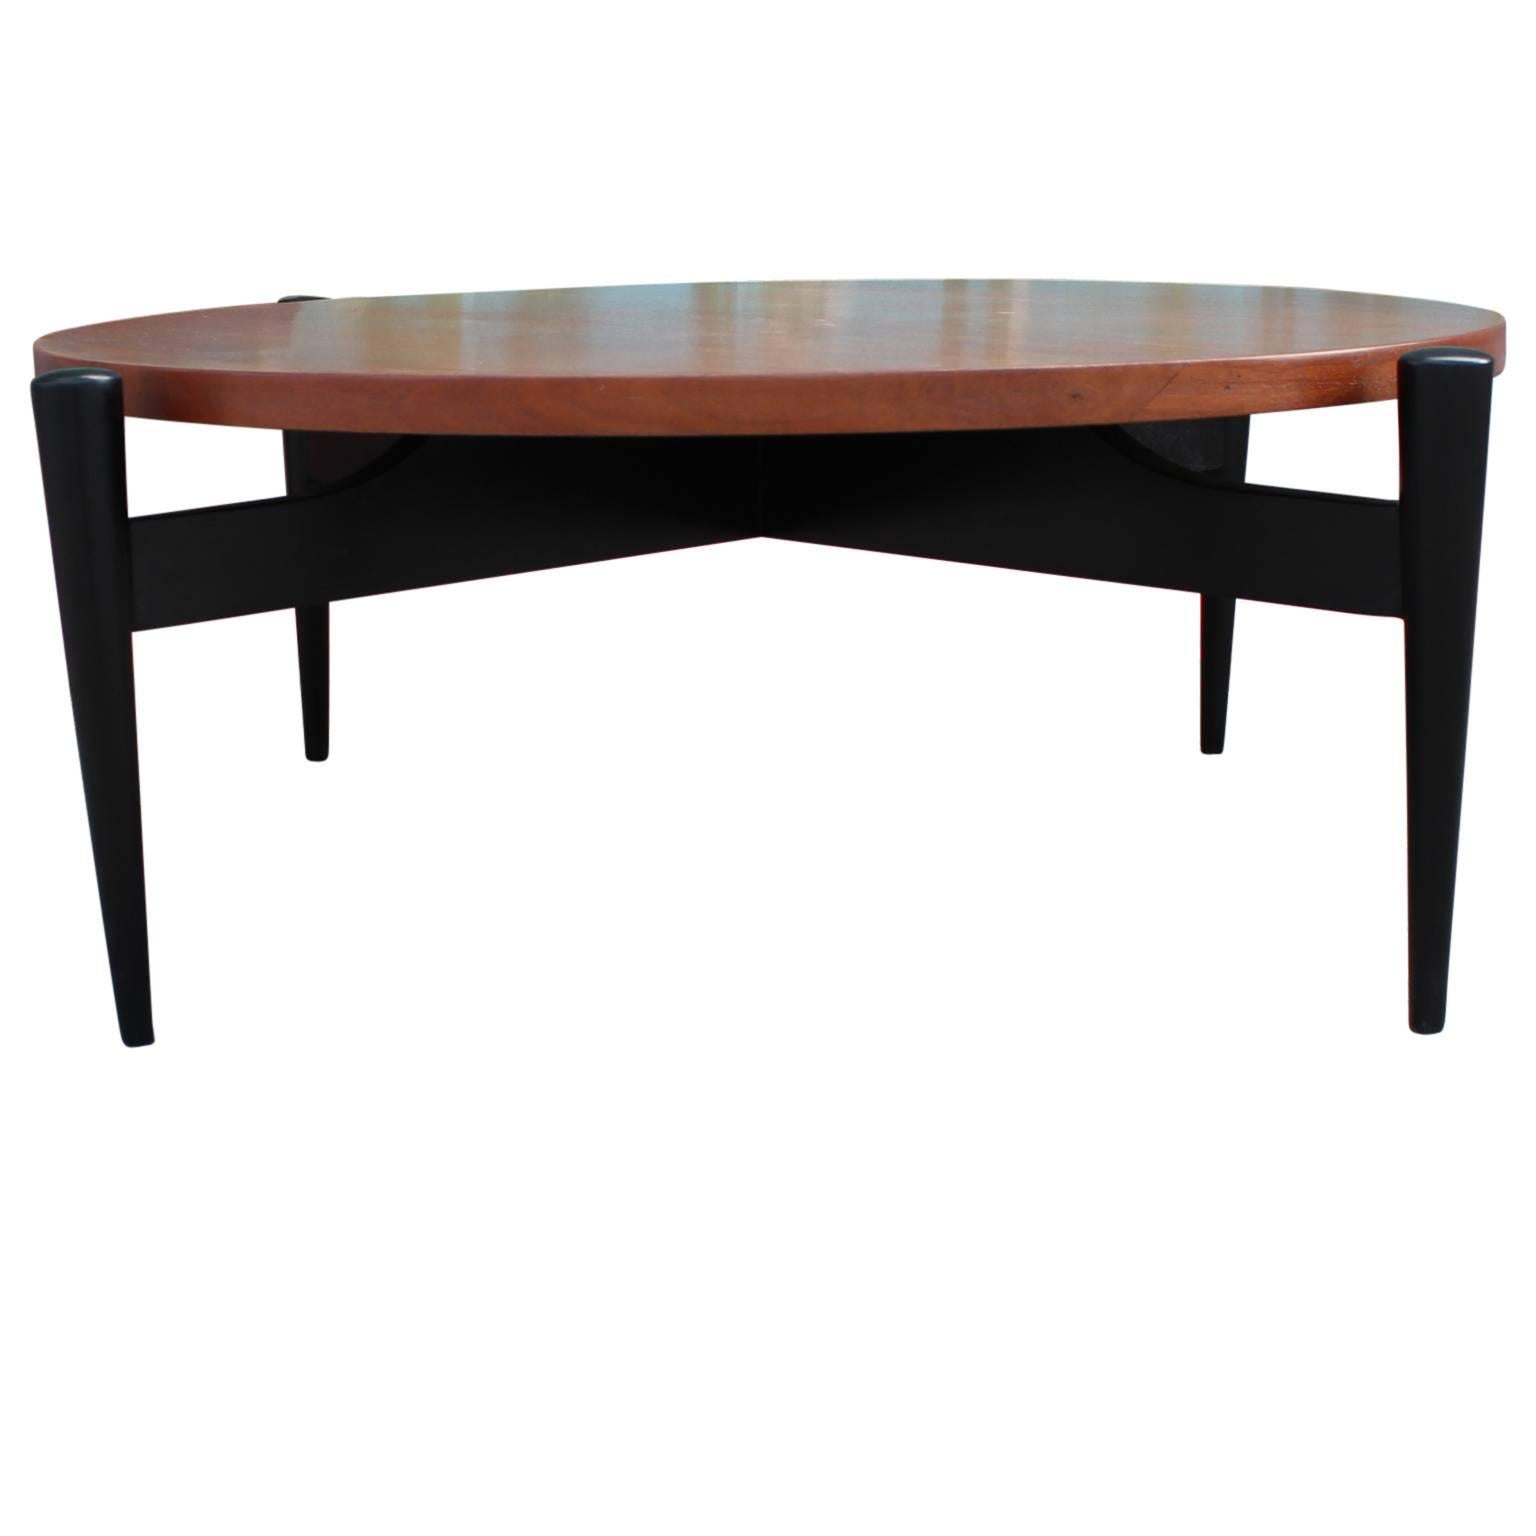 Italian modern two-toned coffee table in the style of Gio Ponti and Paolo Buffa.
In great restored condition. 